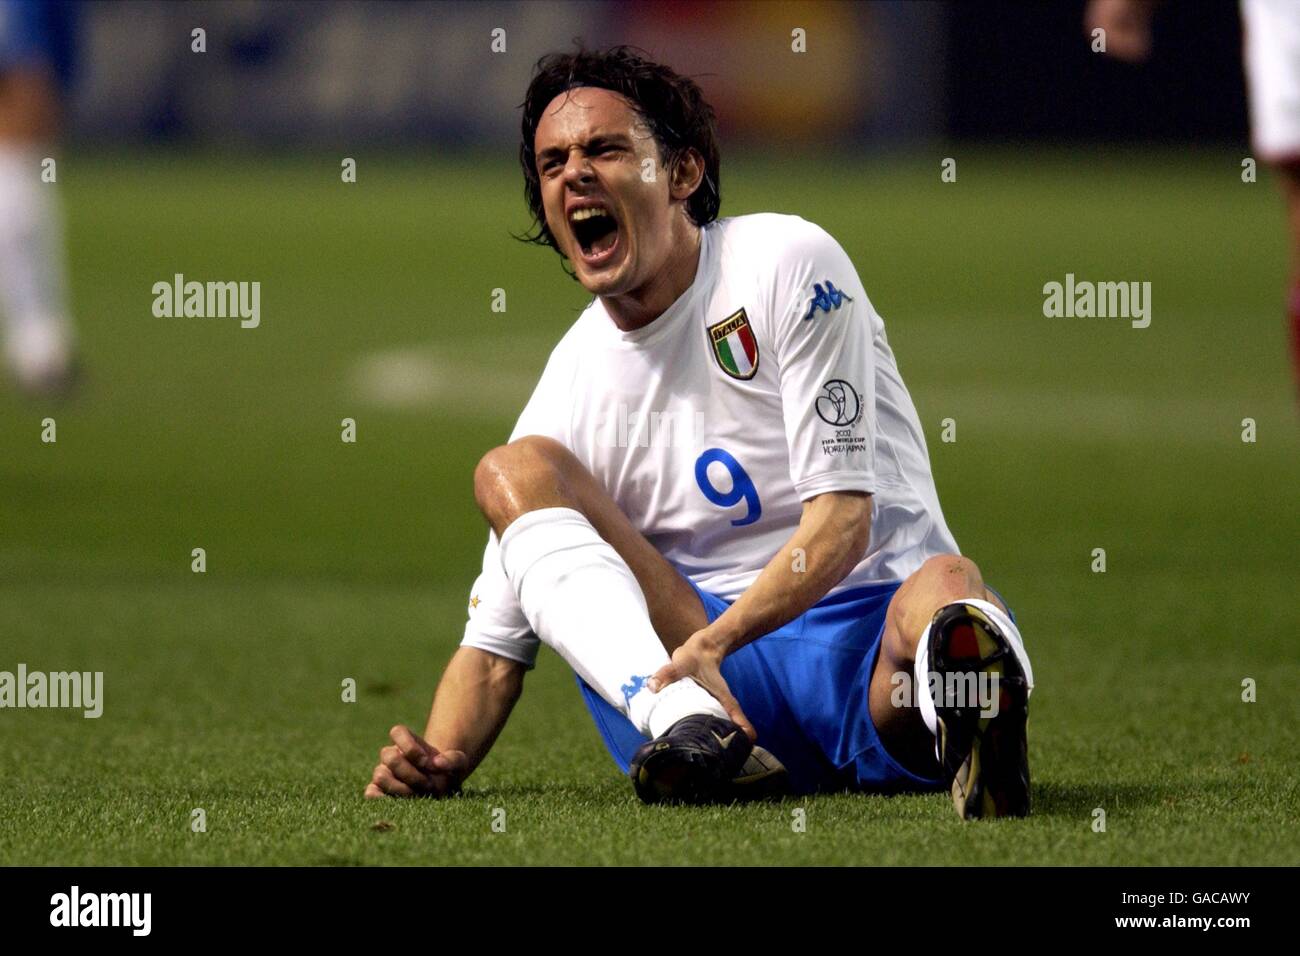 Italy's Filippo Inzaghi feels his calf after a late challenge Stock Photo